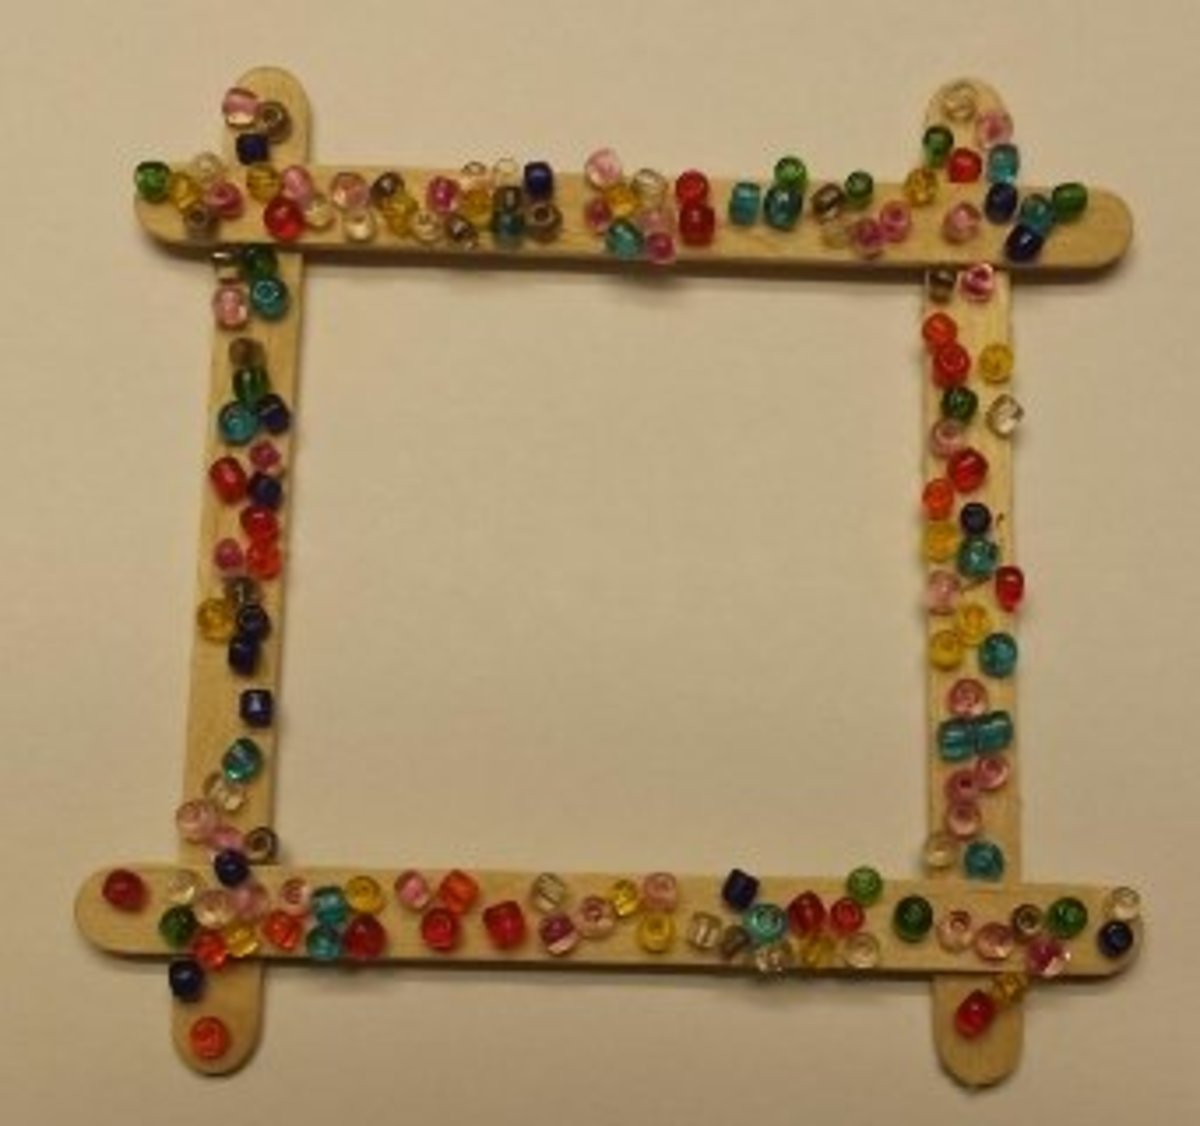 Popsicle-stick picture frames are super easy to make and totally customizable. 